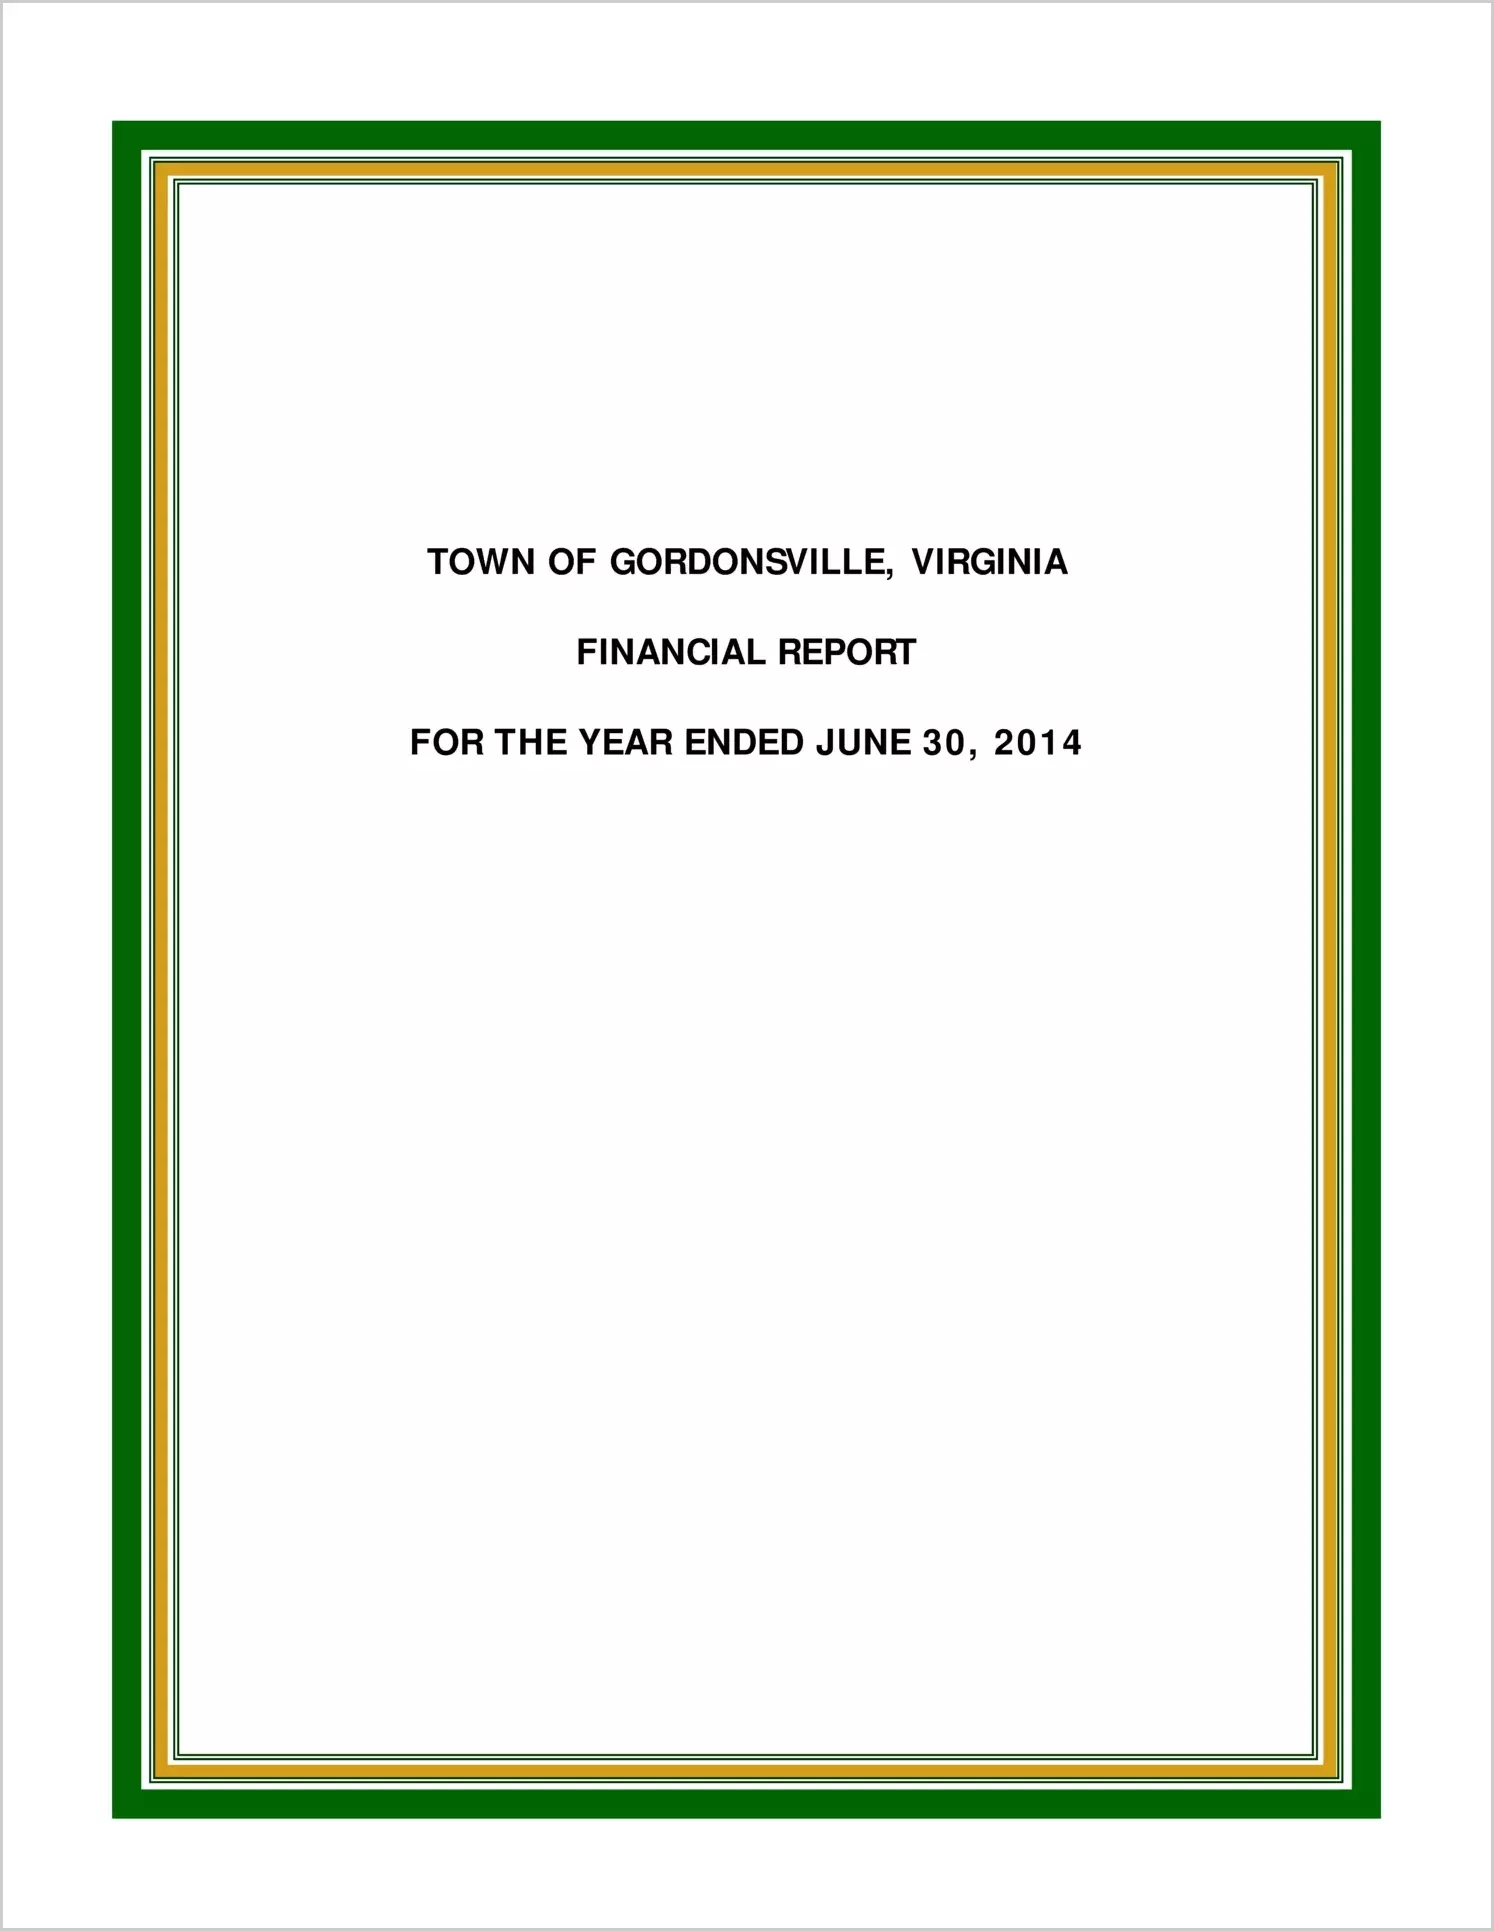 2014 Annual Financial Report for Town of Gordonsville